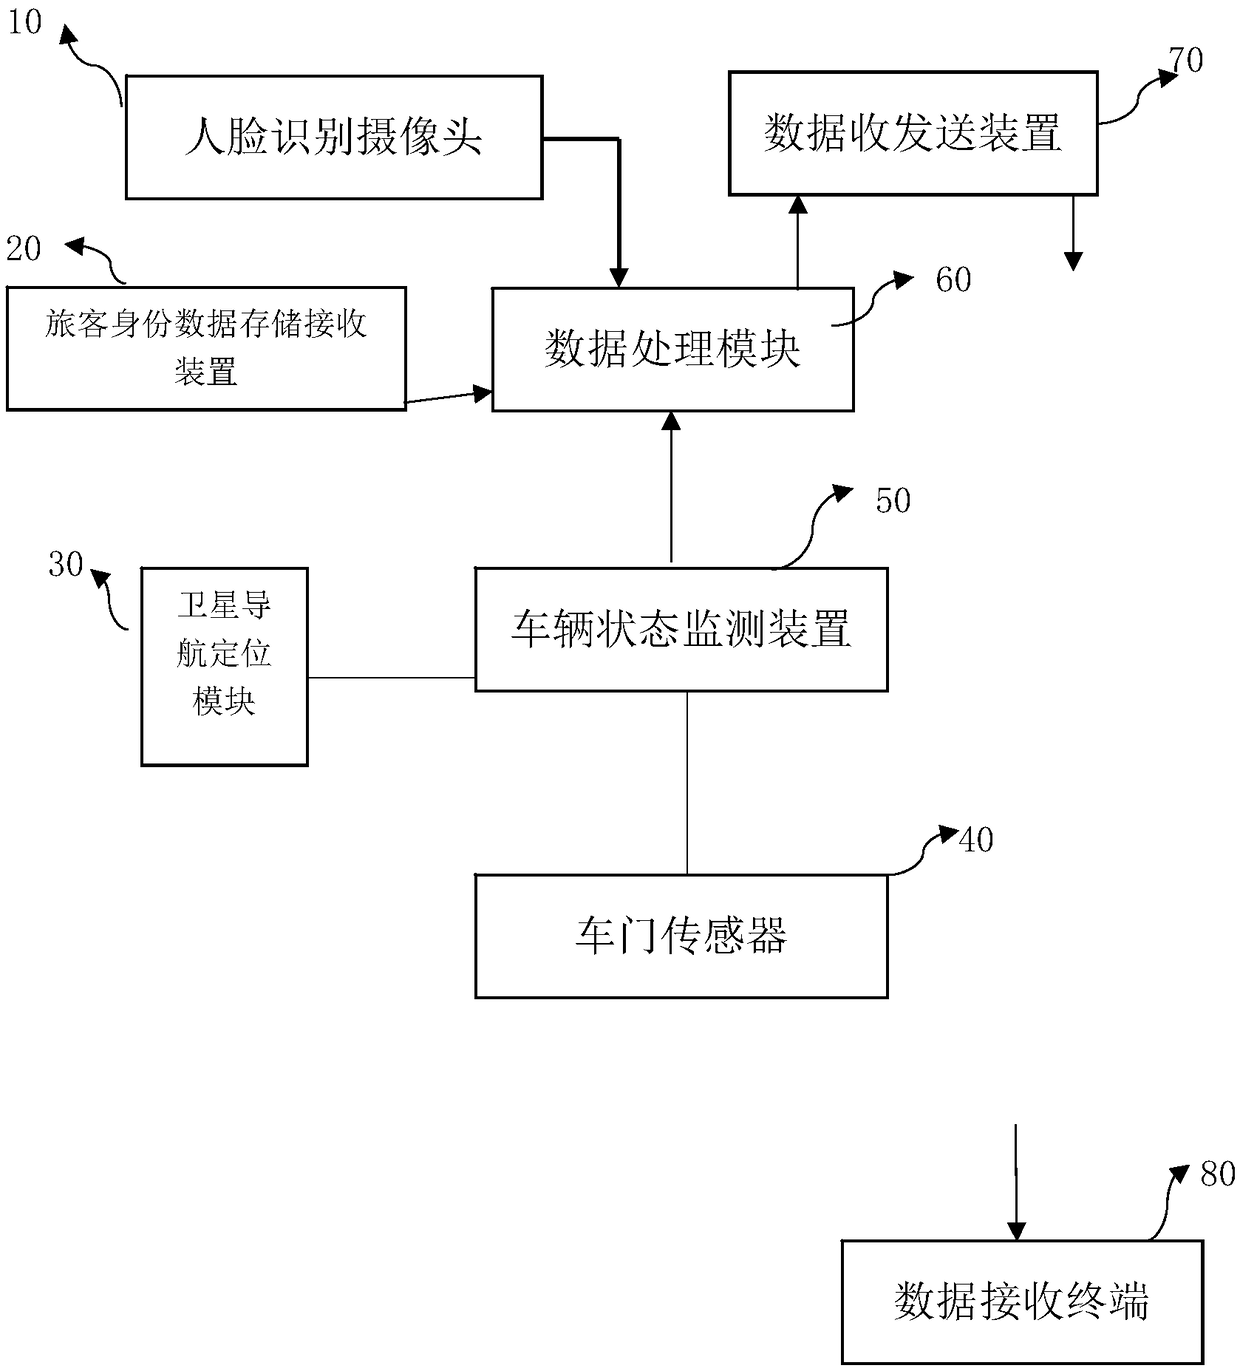 Identification-based bus passengers' journey safety management system and method